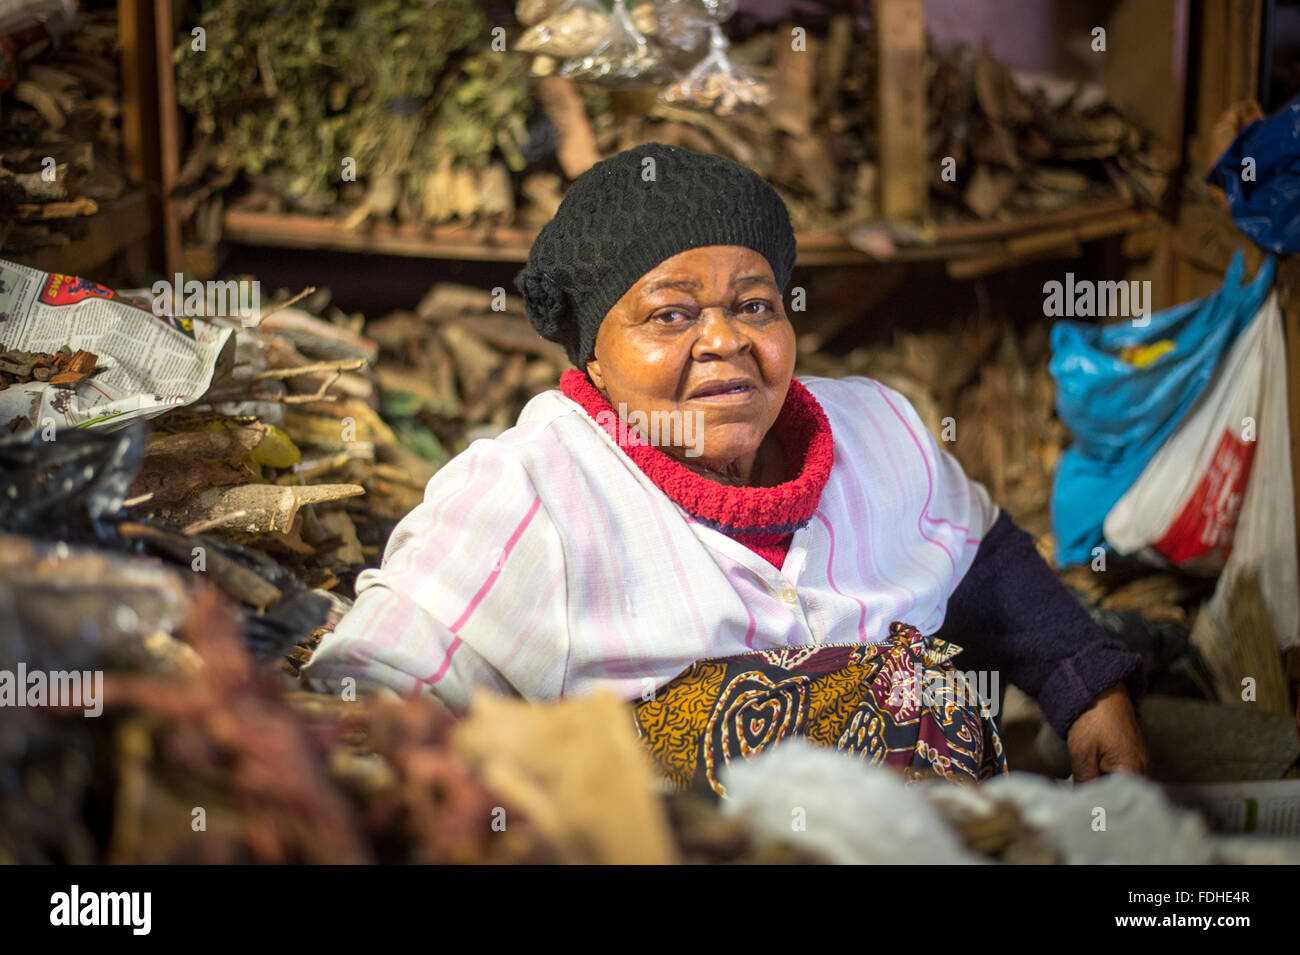 Shopkeeper selling traditional herbal medicines at the Manzini Wholesale Produce and Craft Market in Swaziland, Africa Stock Photo